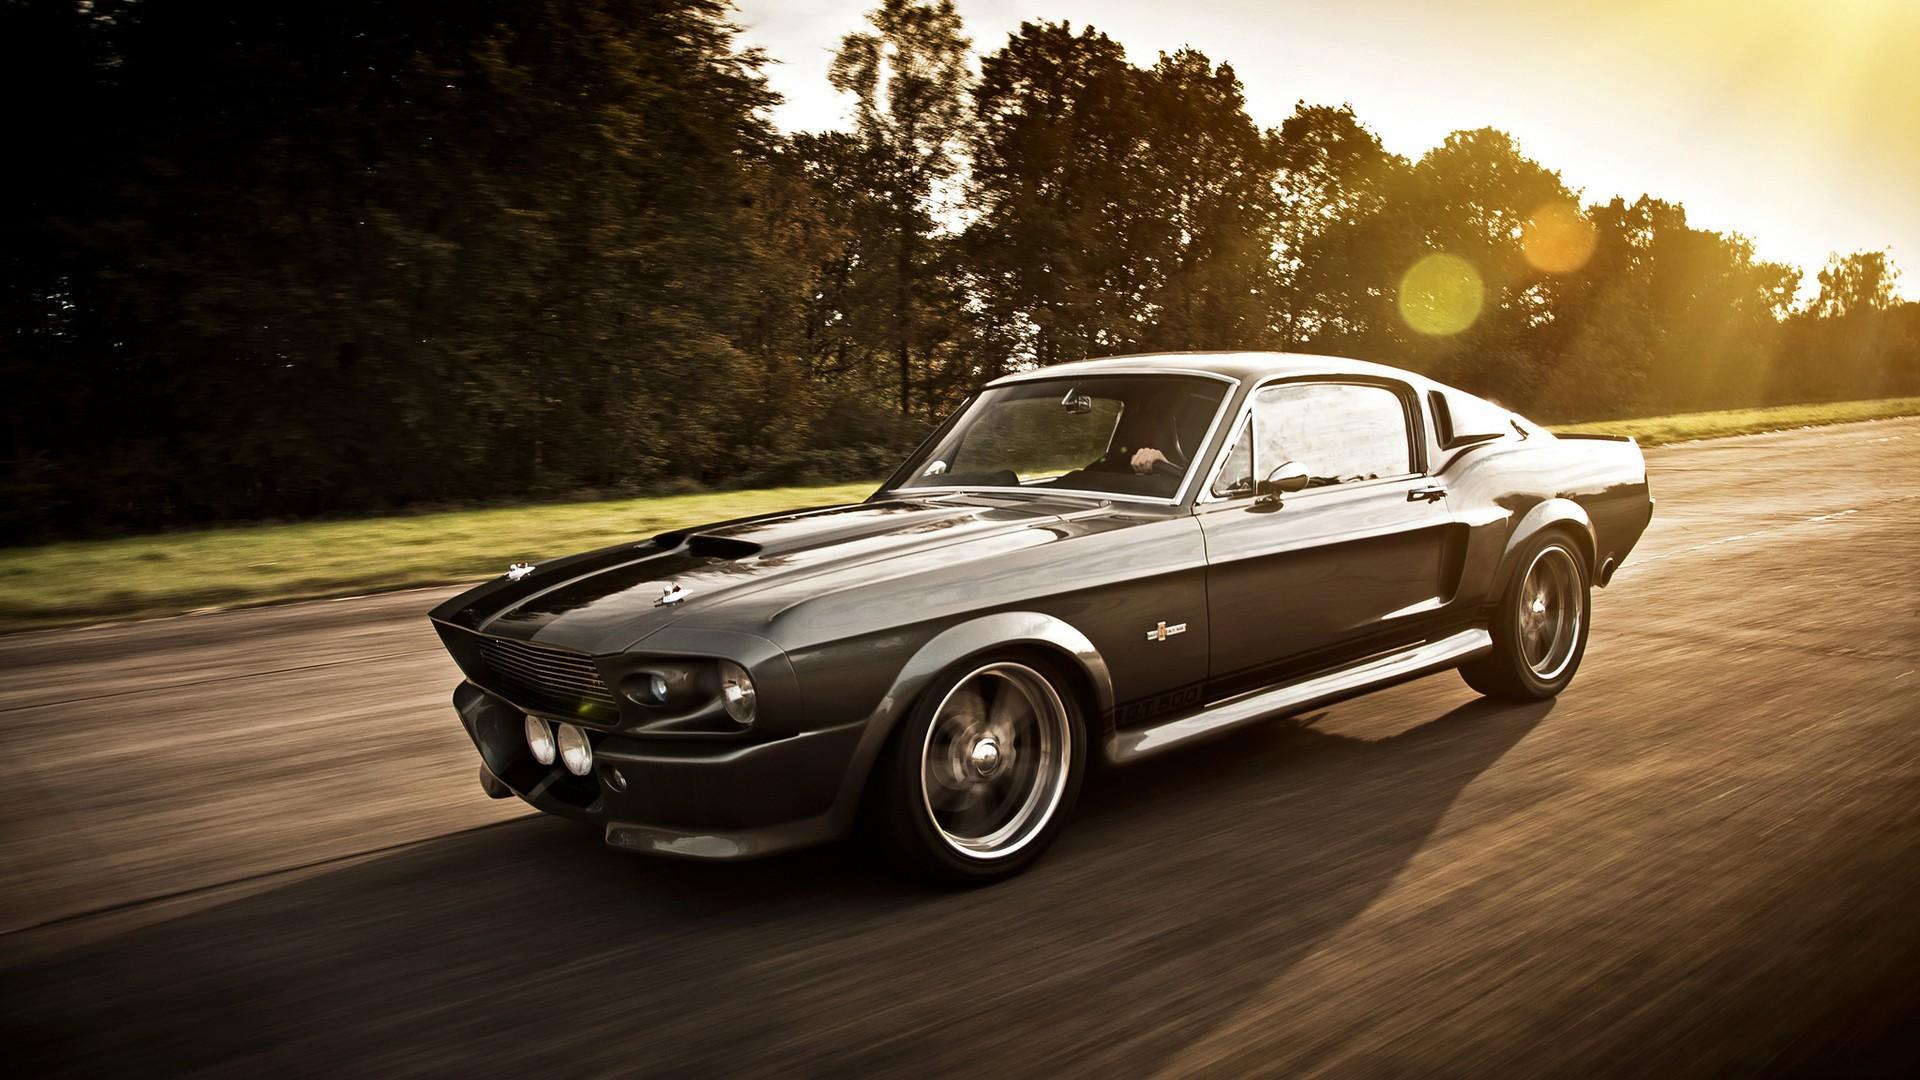 Ford Mustang Eleanor Best Picture HD Wallpaper Ford